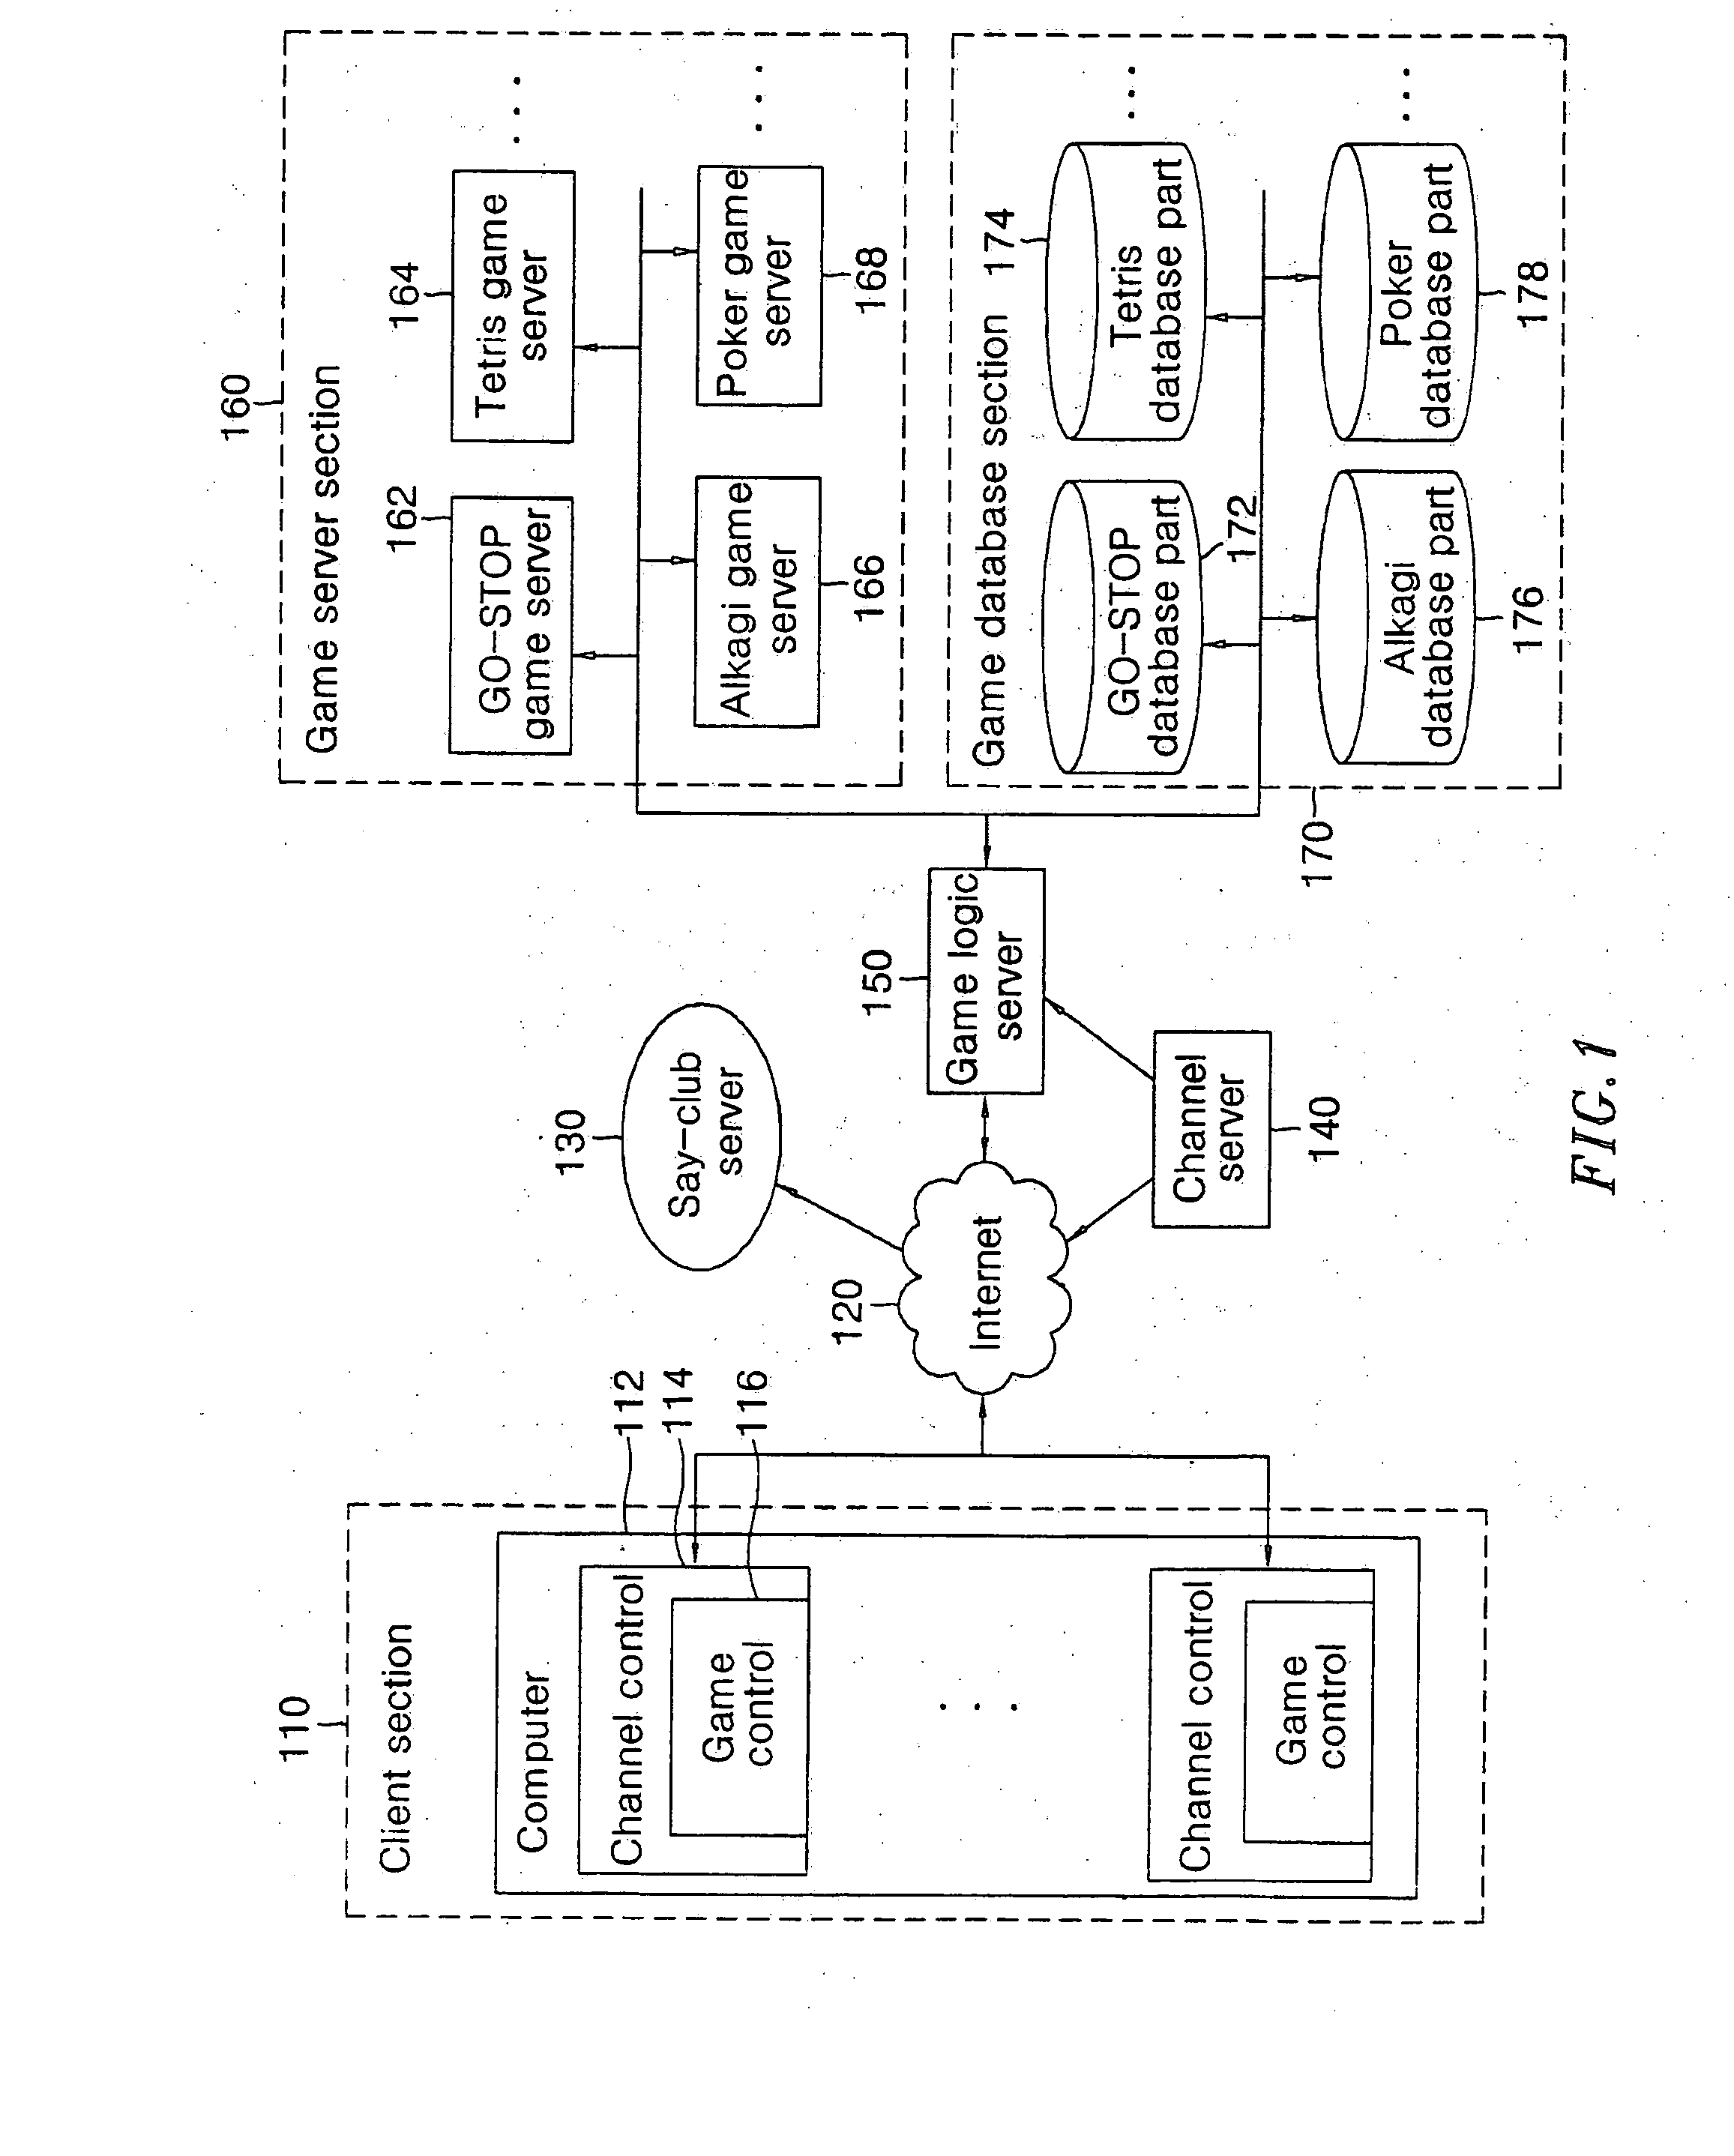 Method and system for providing game service by using the internet